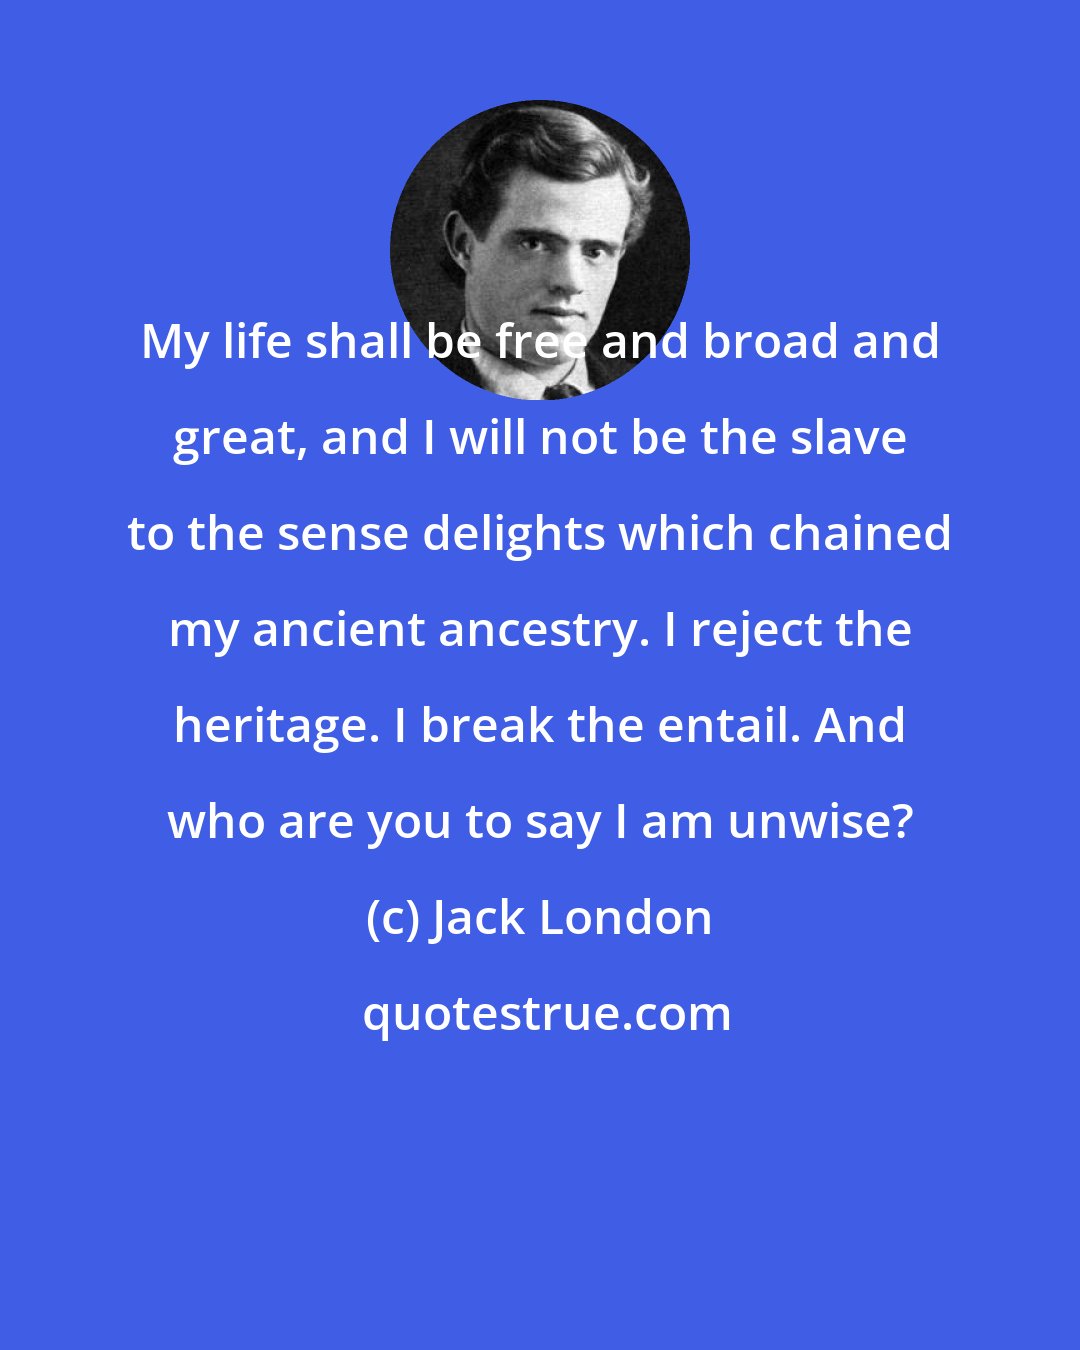 Jack London: My life shall be free and broad and great, and I will not be the slave to the sense delights which chained my ancient ancestry. I reject the heritage. I break the entail. And who are you to say I am unwise?